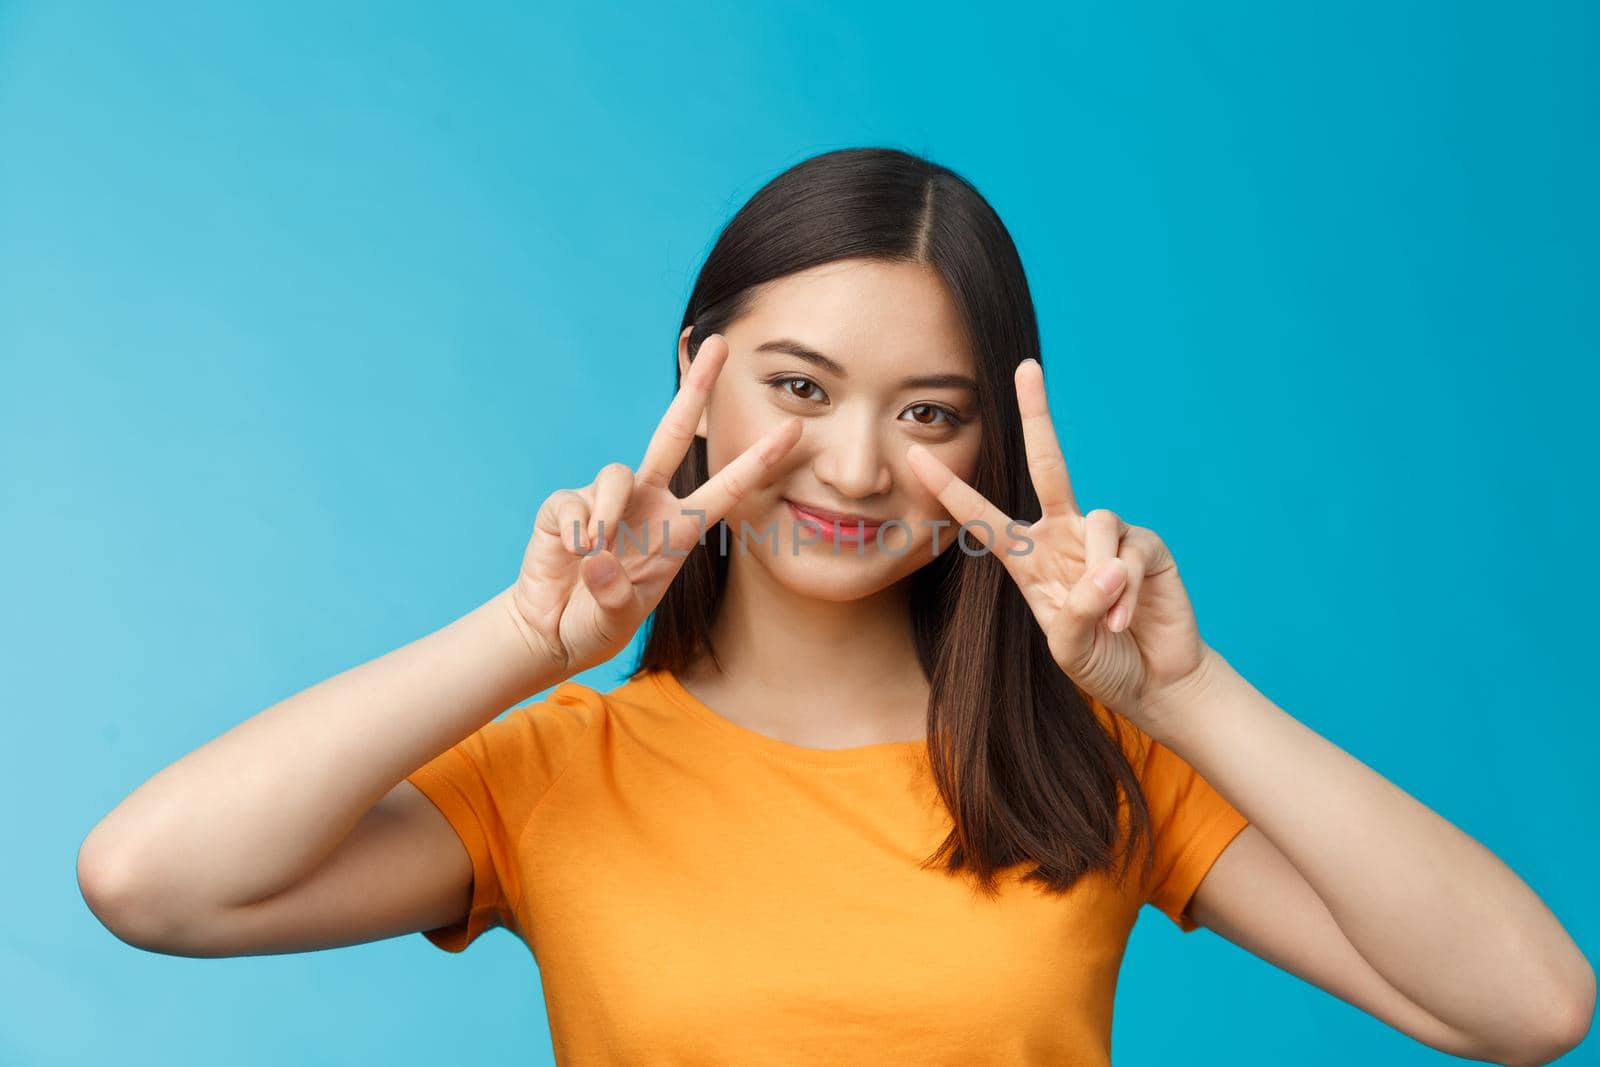 Tender cute asian woman short dark haircut show peace victory signs near cheeks, posing joyfully grinning optimistic, determined win, tilt head coquettish, stand blue background cheerful.